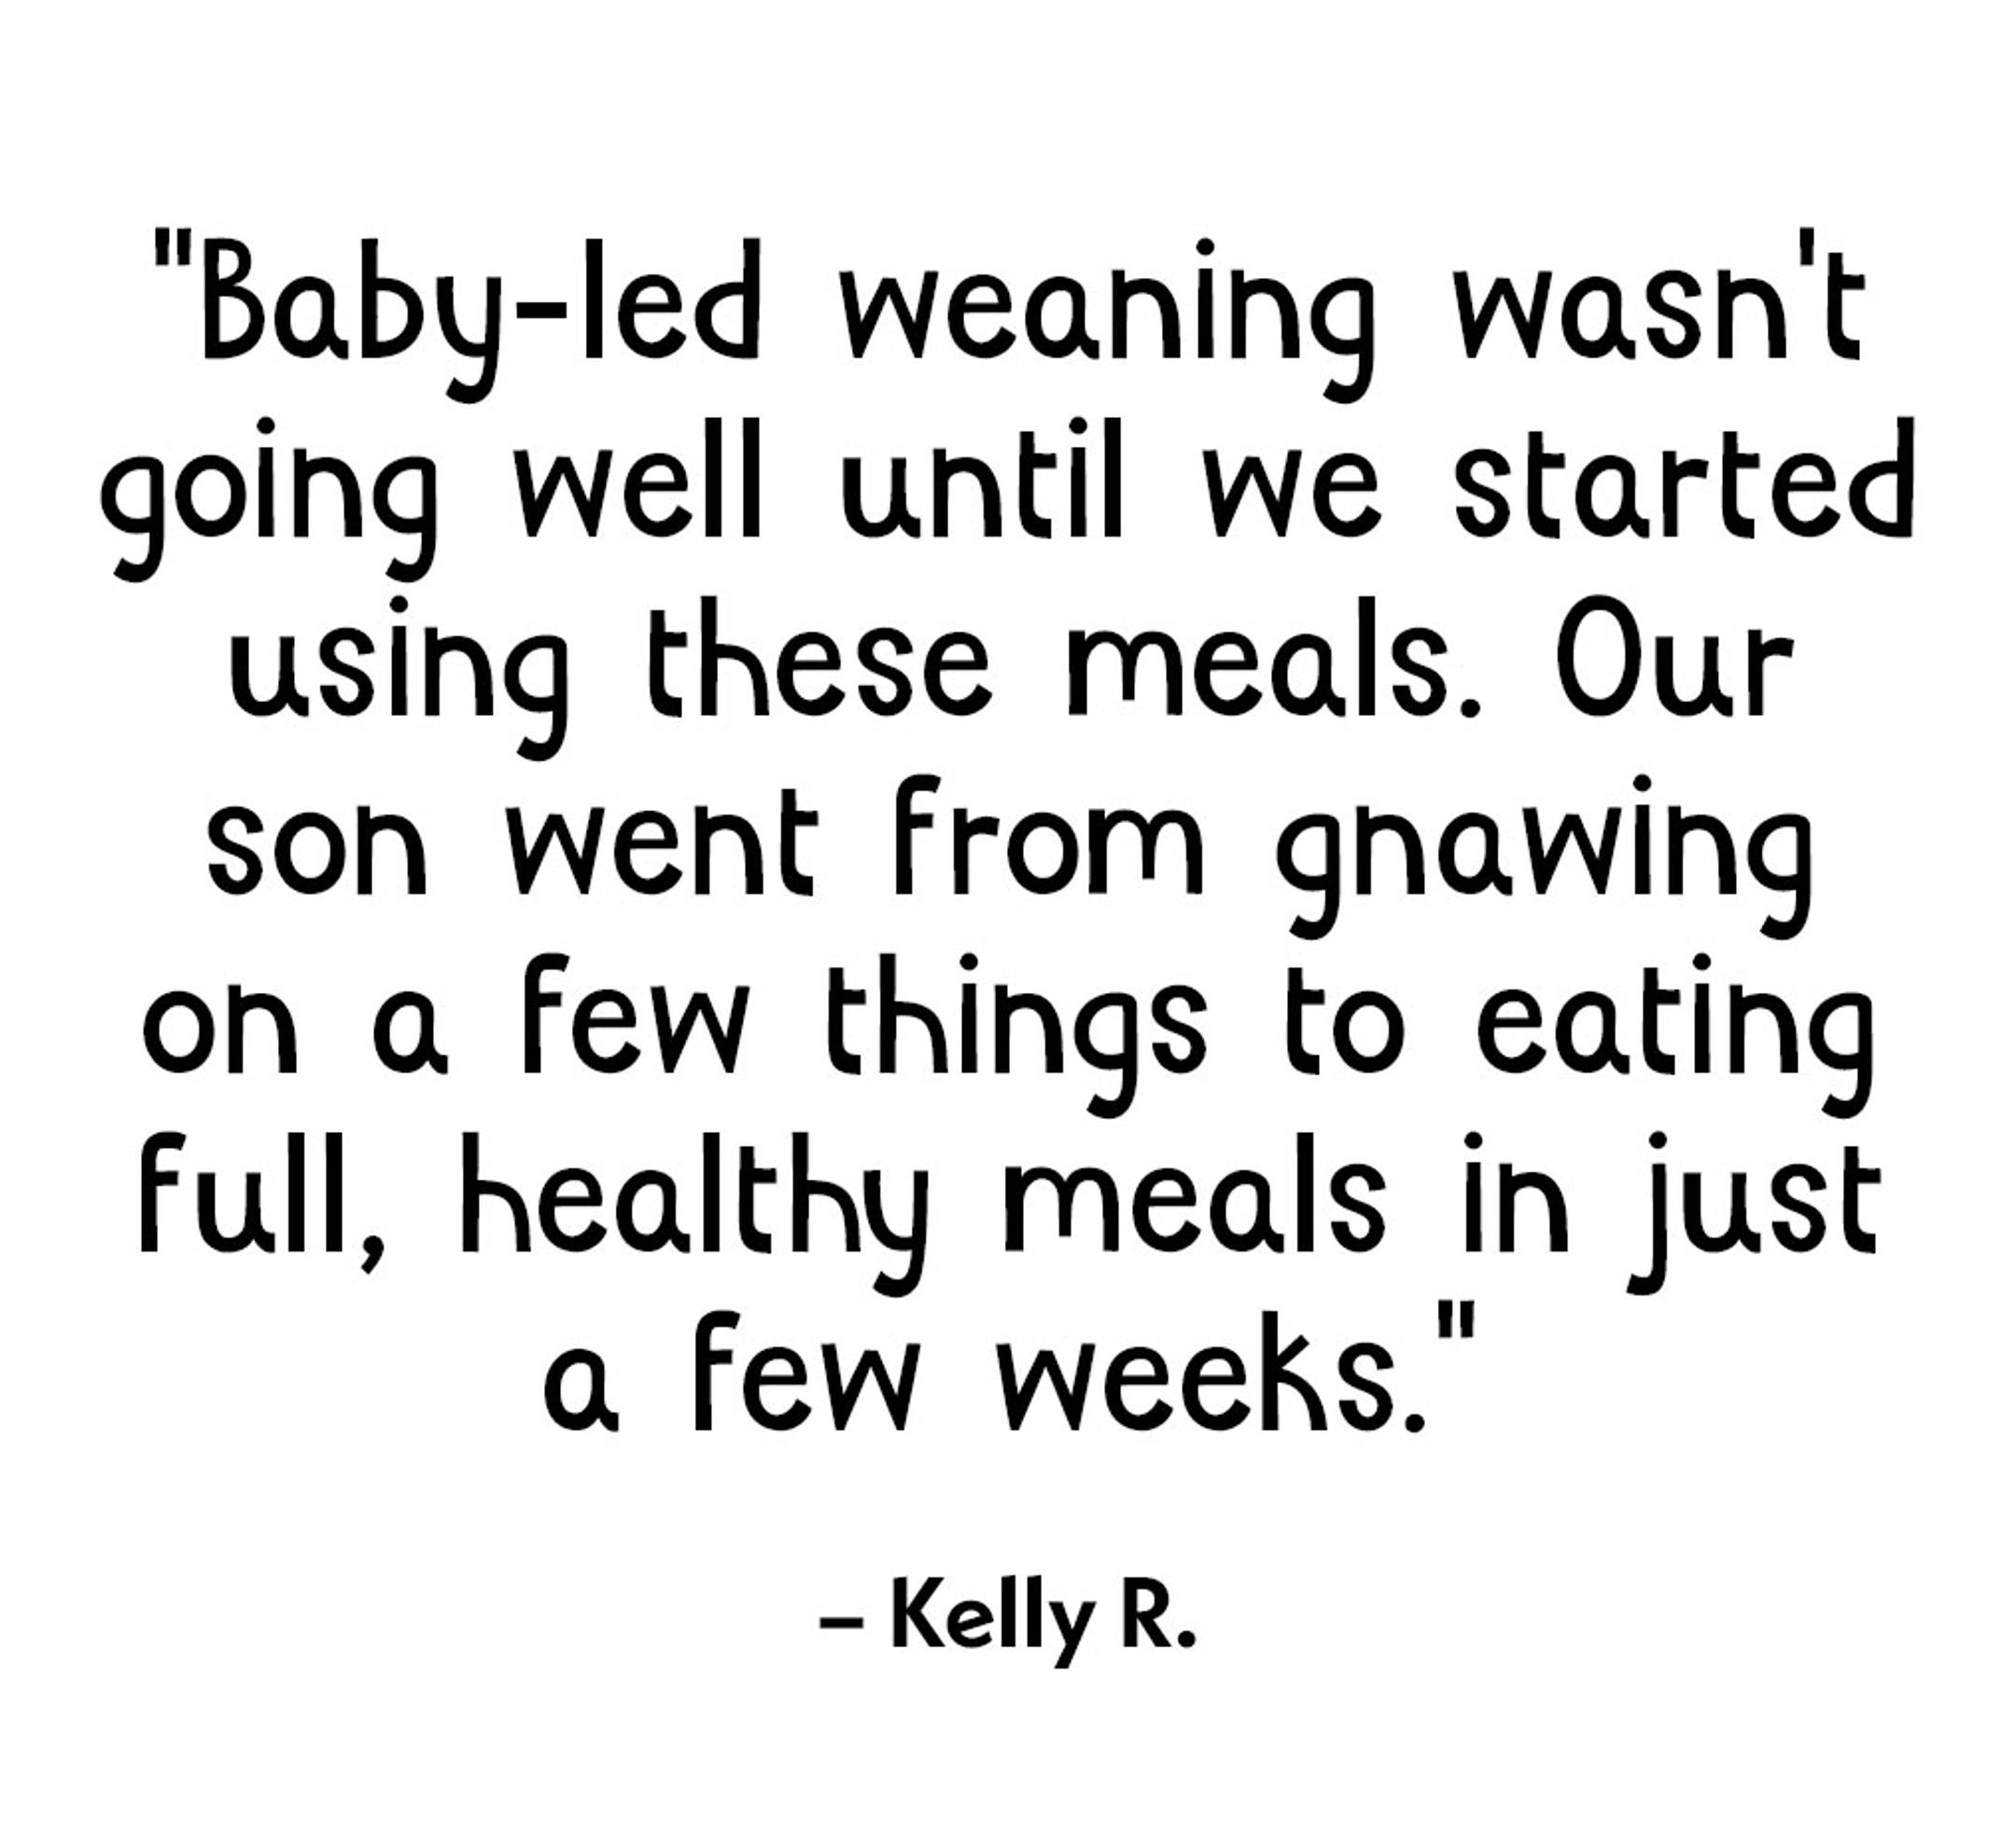 "Baby-led weaning wasn't going well until we started using meals. Our son went from gnawing on a few things to eating full, healthy meals in just a few weeks."